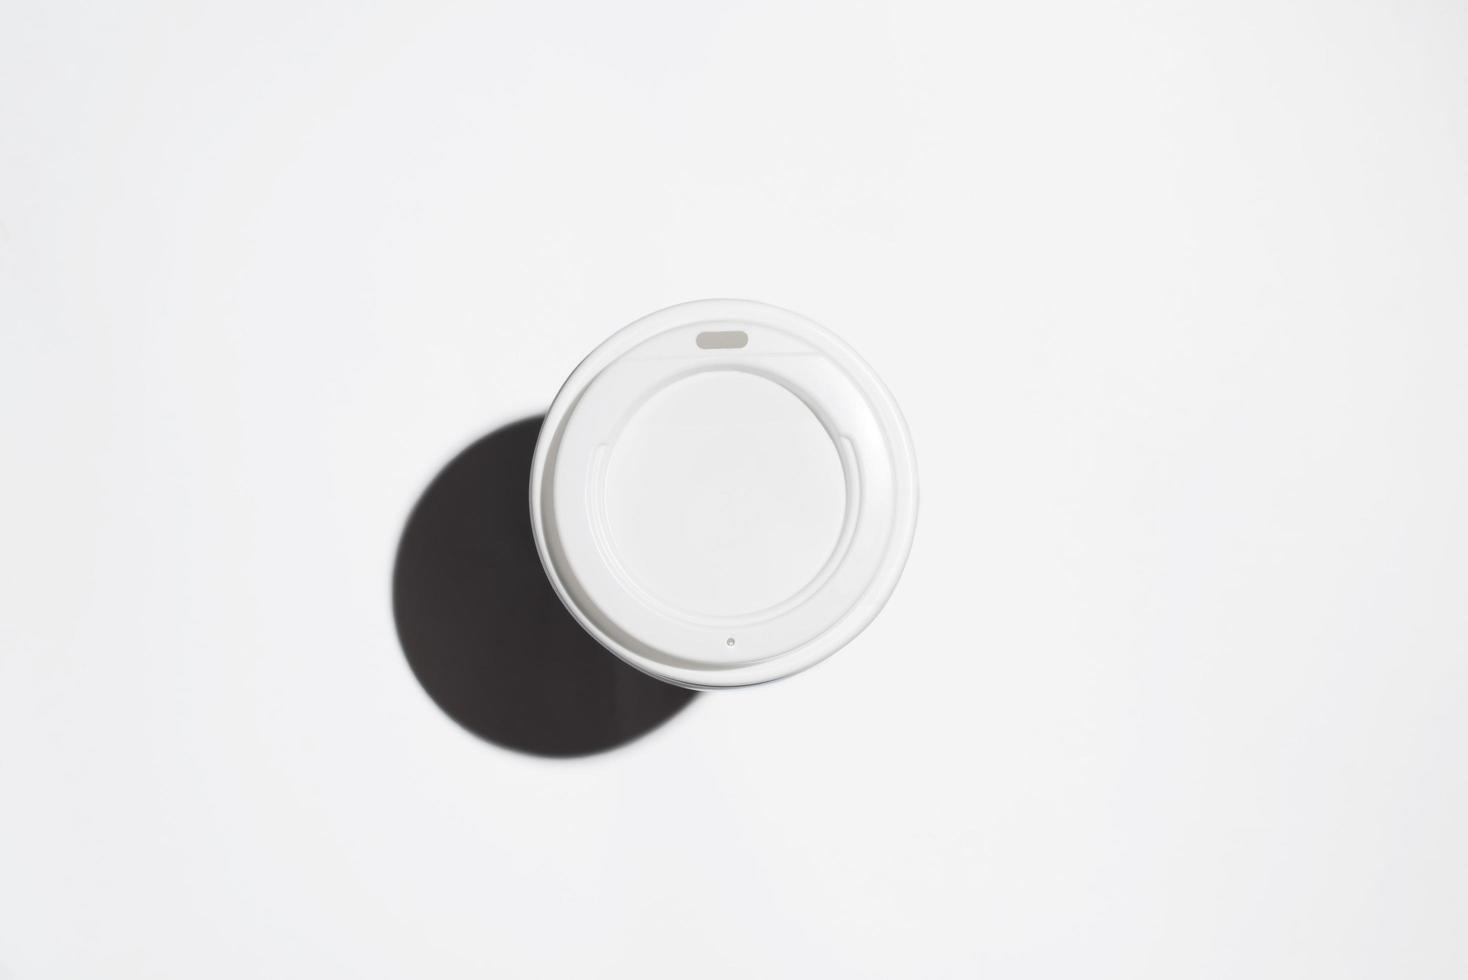 Disposable cup of coffee on a white background, top view. Minimalistic photo, selective focus photo